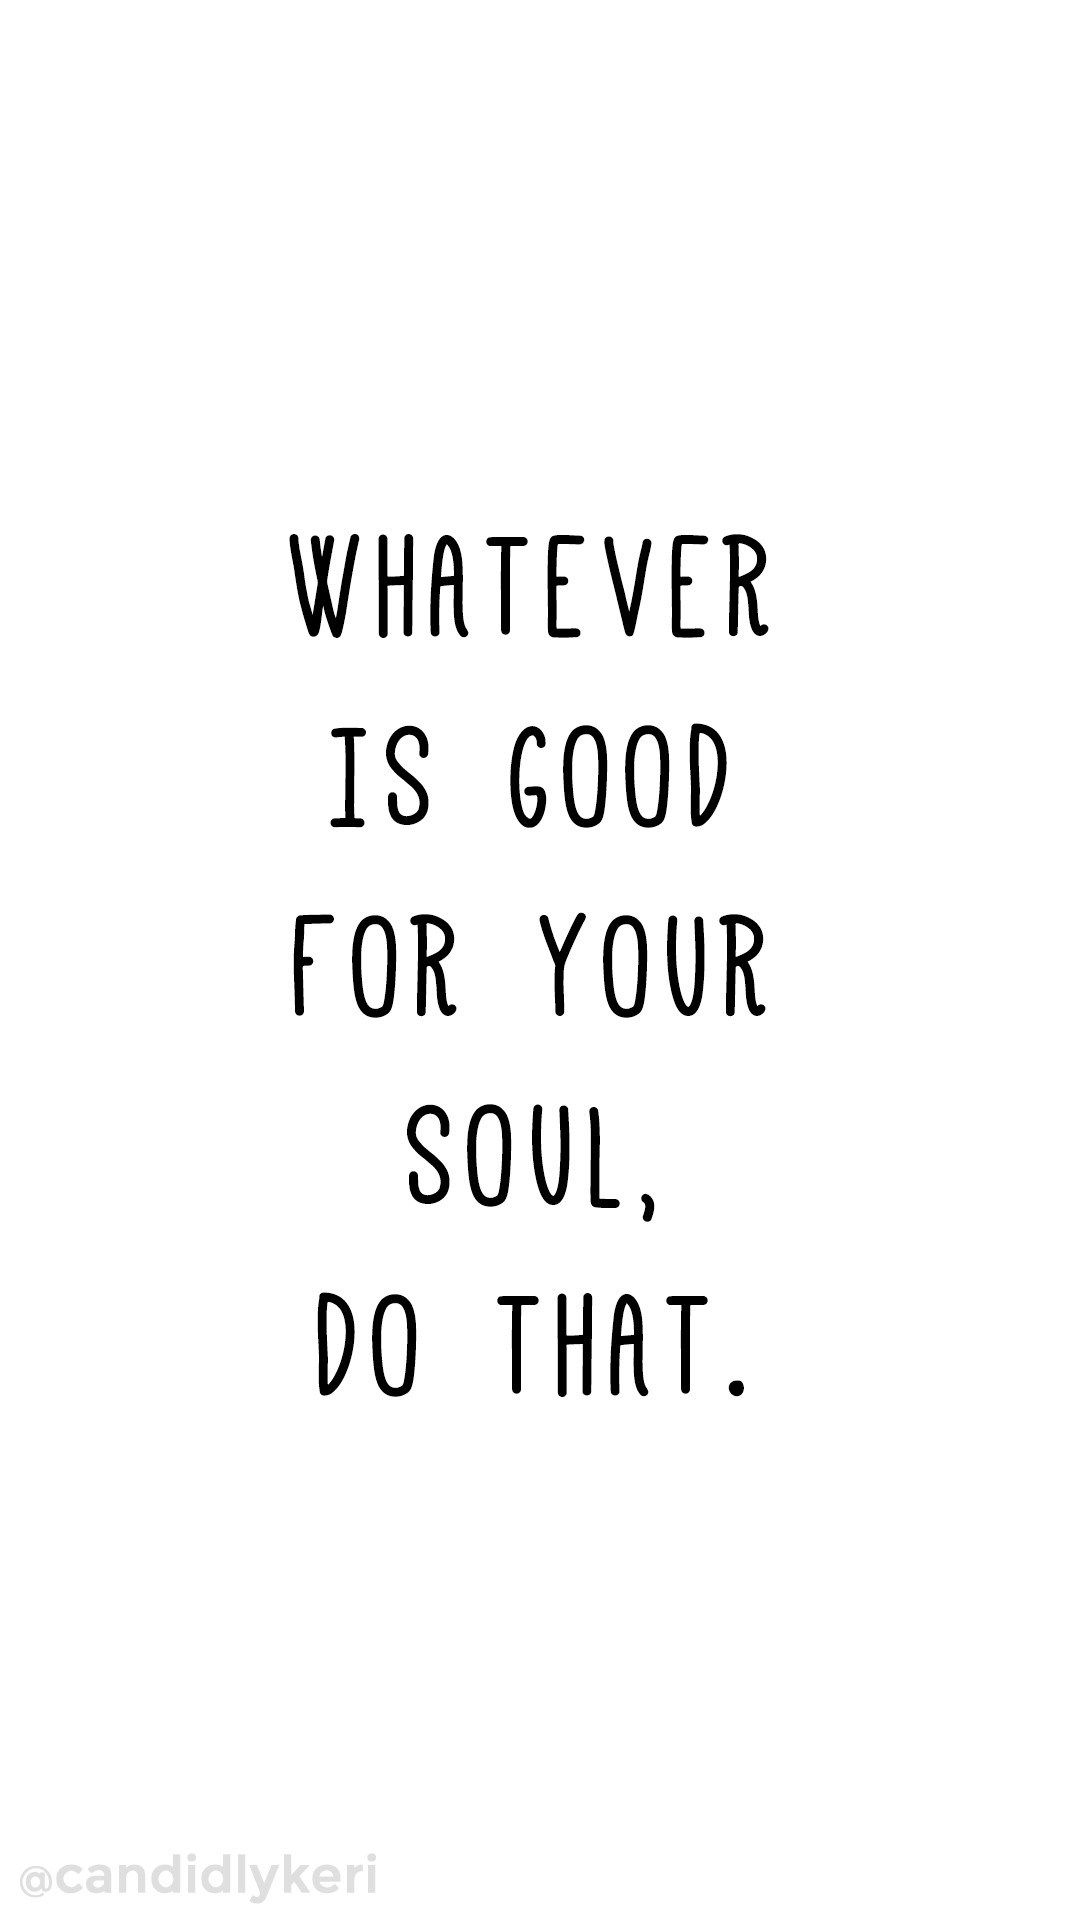 1080x1920 Whatever is good for your soul do that. Quote inspirational motivational  wallpaper you can download